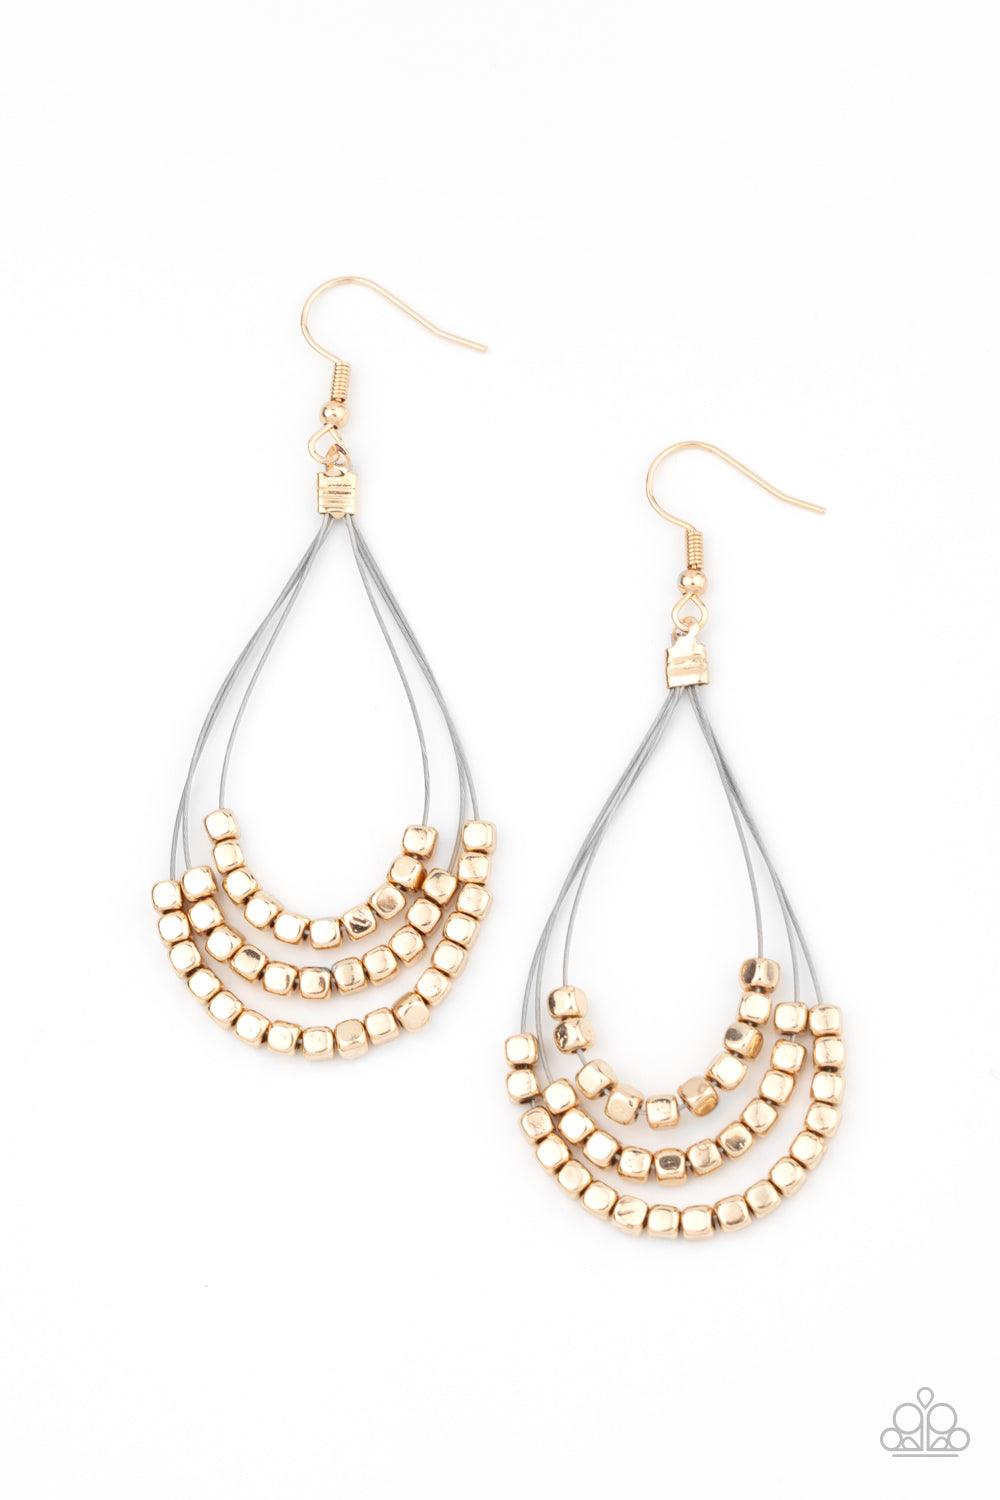 Paparazzi Accessories Off The Blocks Shimmer - Gold Three rows of dainty gold cube beads glides along shiny thin wire, layering into an edgy teardrop lure. Earring attaches to a standard fishhook fitting. Sold as one pair of earrings. Jewelry